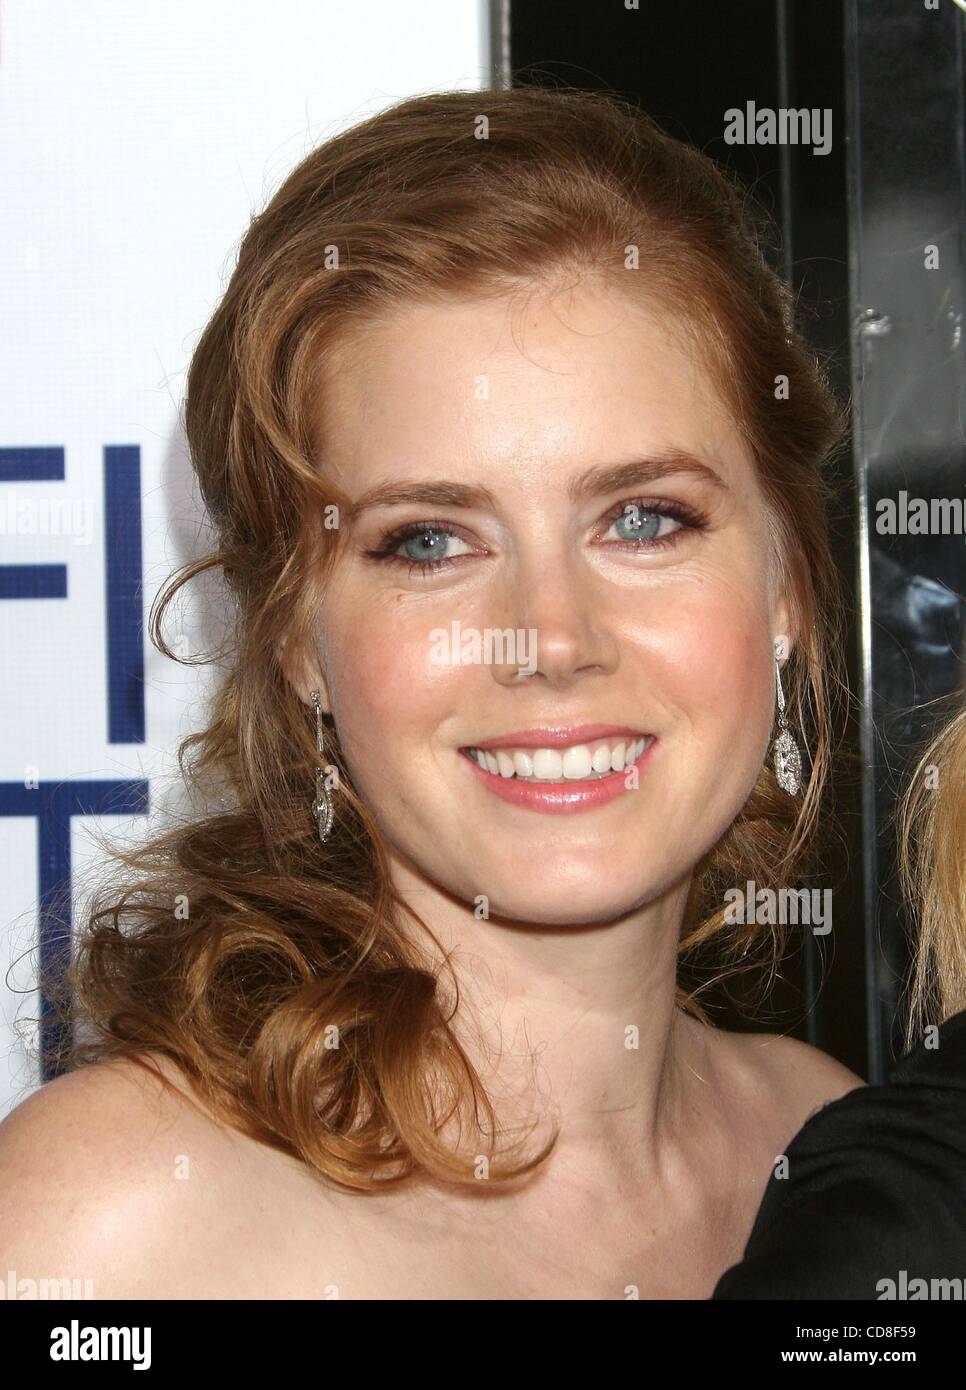 Oct 30, 2008 - Los Angeles, California, USA - Actress AMY ADAMS  at the The 2008 AFI Fest Opening Night Premiere 'Doubt' held at the Arclight Hollywood. (Credit Image: Â© Paul Fenton/ZUMA Press) Stock Photo